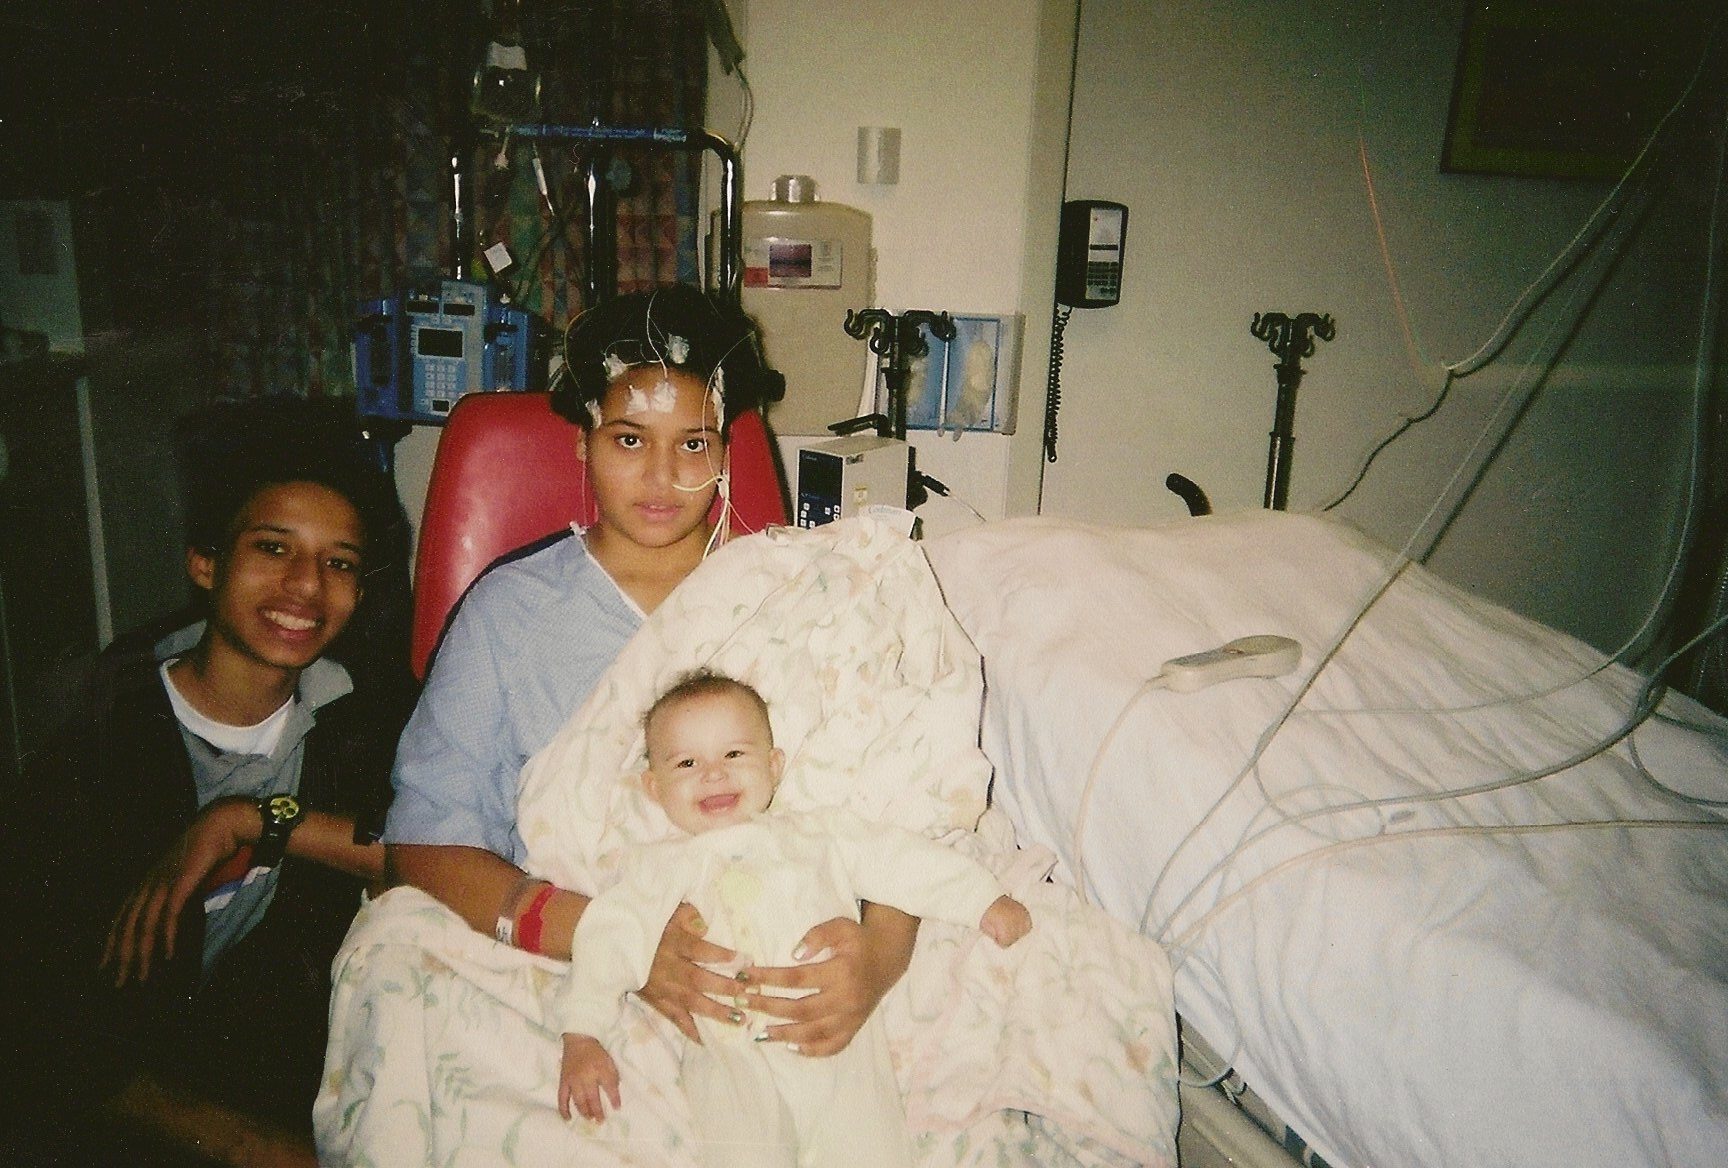 Chaunell in the hospital with Cordell and baby Jameelah